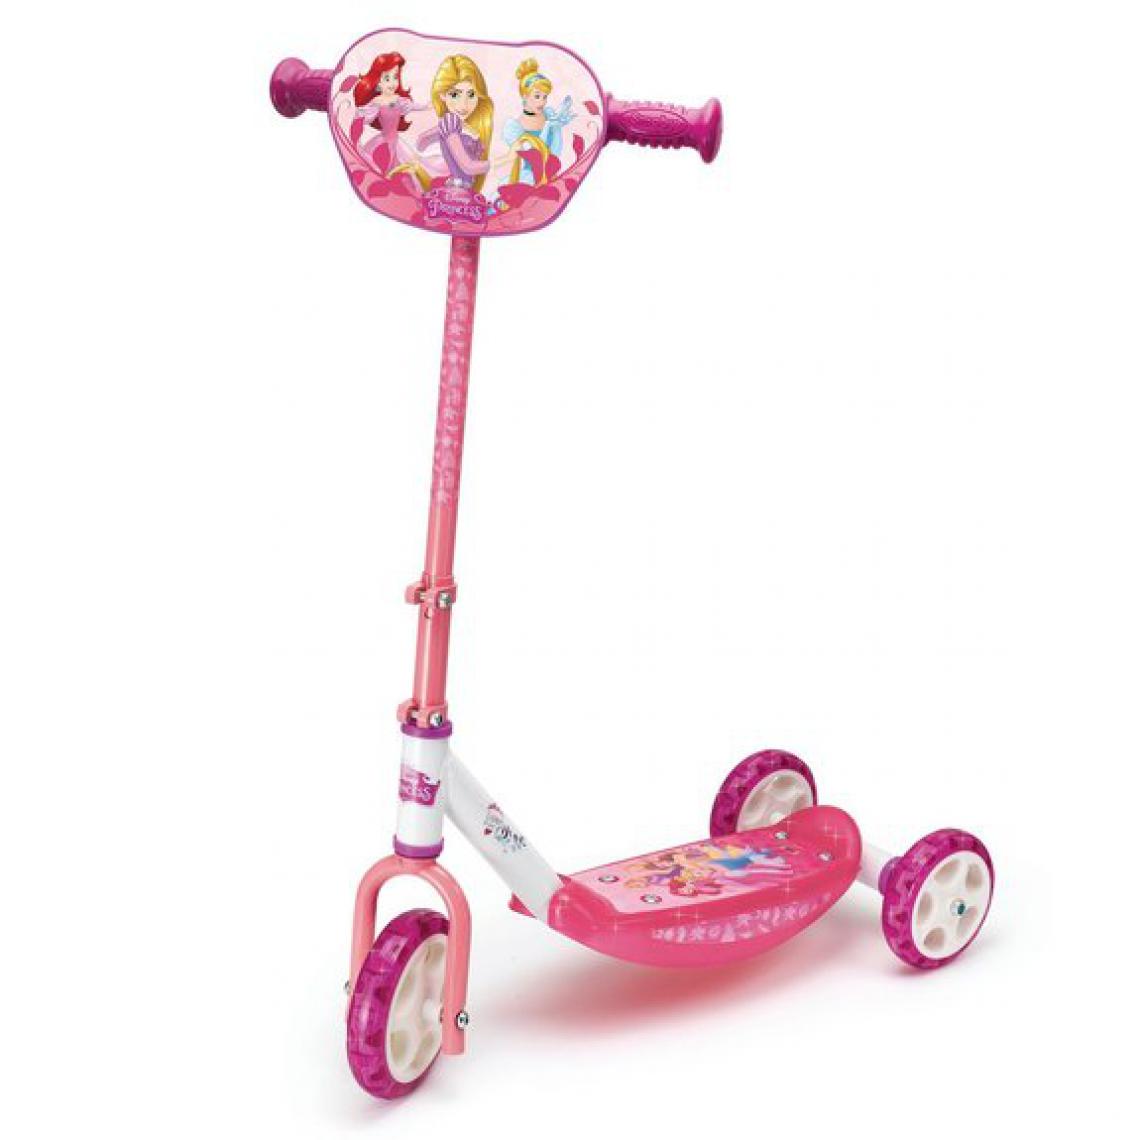 Ludendo - Patinette 3 roues Disney Princesses - Tricycle